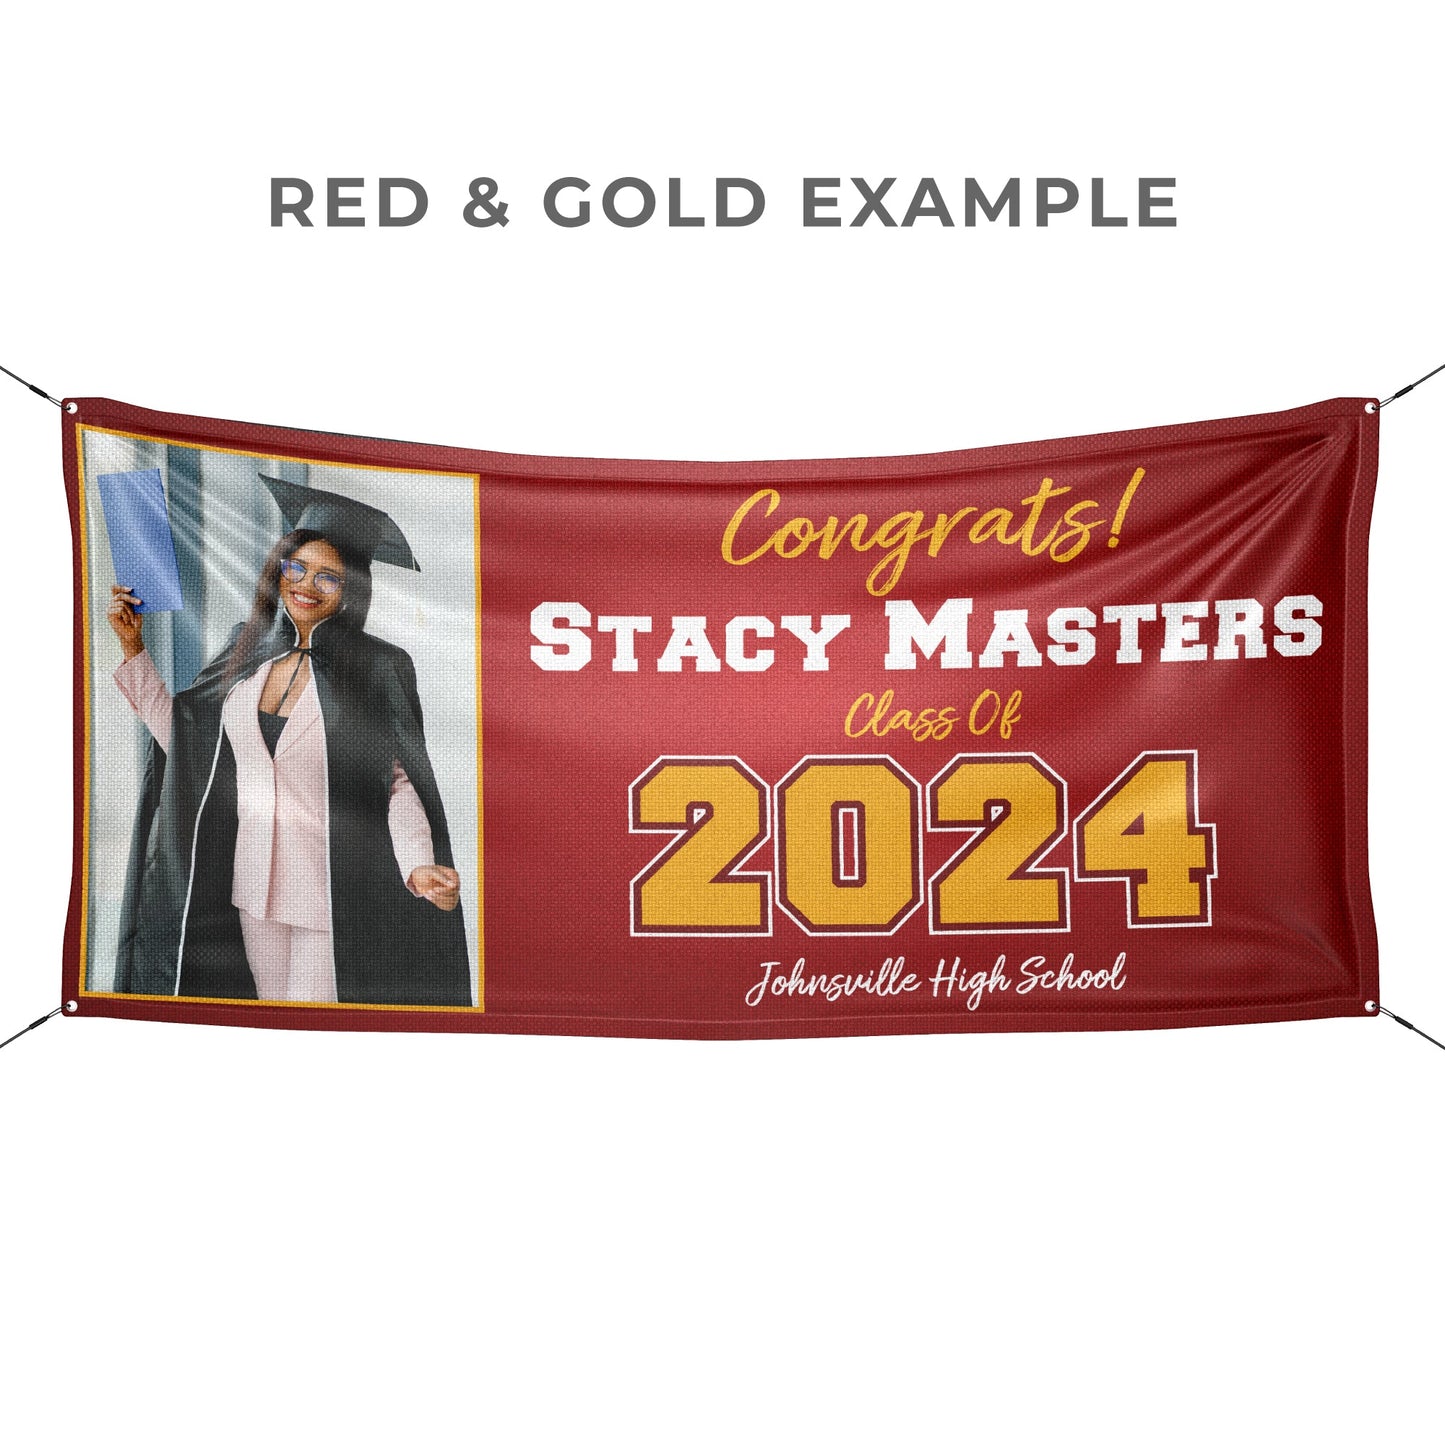 Grad Banners & Gifts - Personalized Congrats Graduation Banner With Image